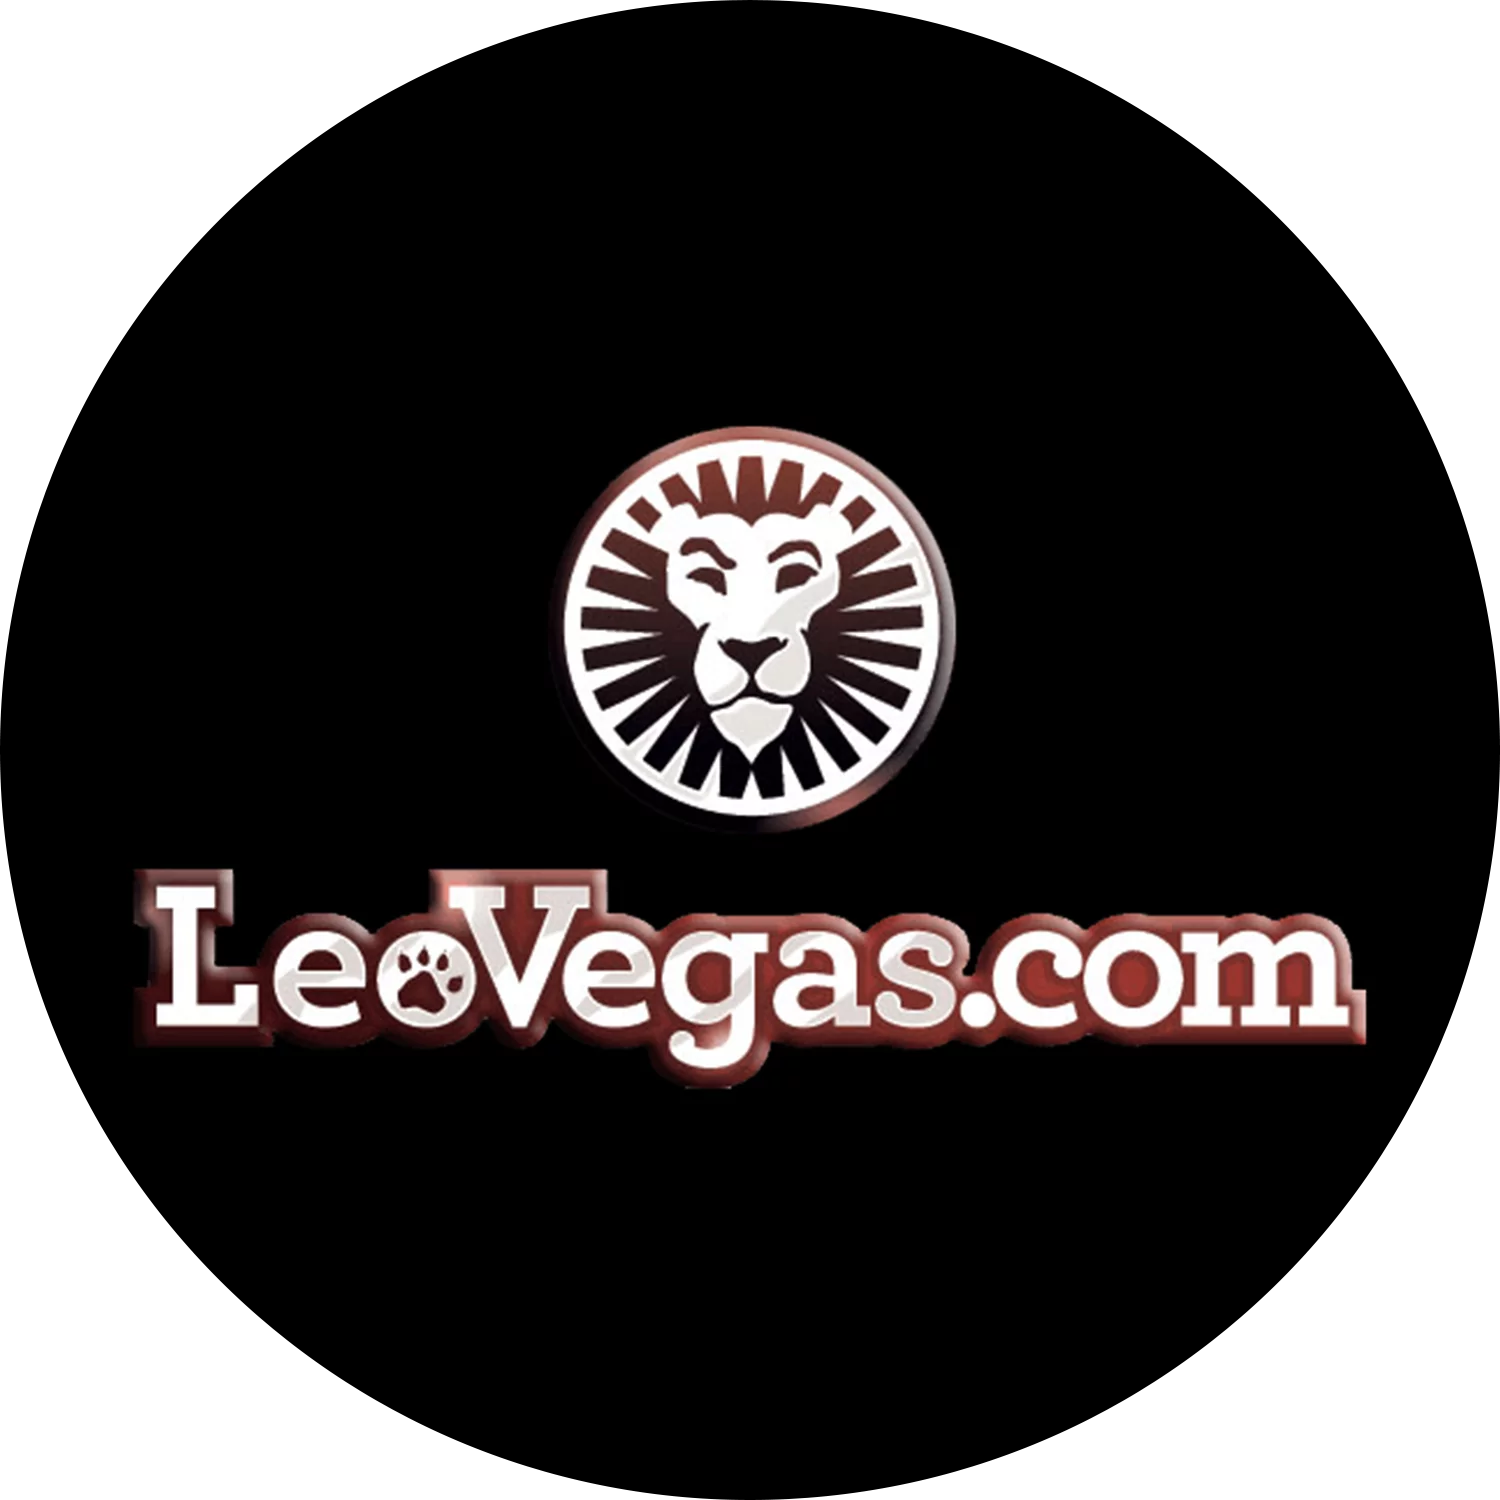 Sign up for LeoVegas and start gambling safely.